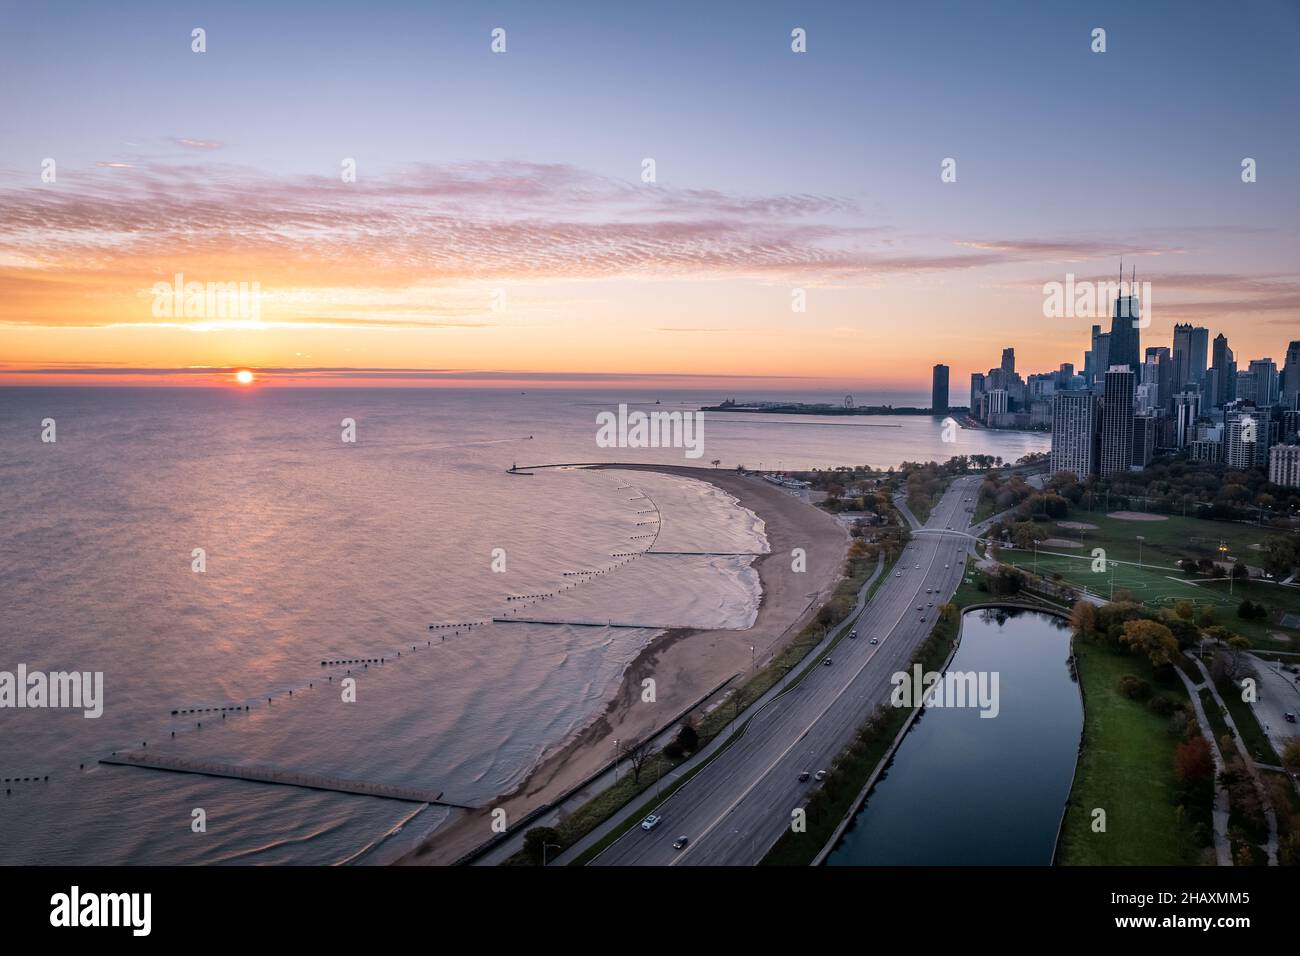 Aerial view of cityscape and Lake Michigan at sunset, Chicago, Illinois, USA Stock Photo